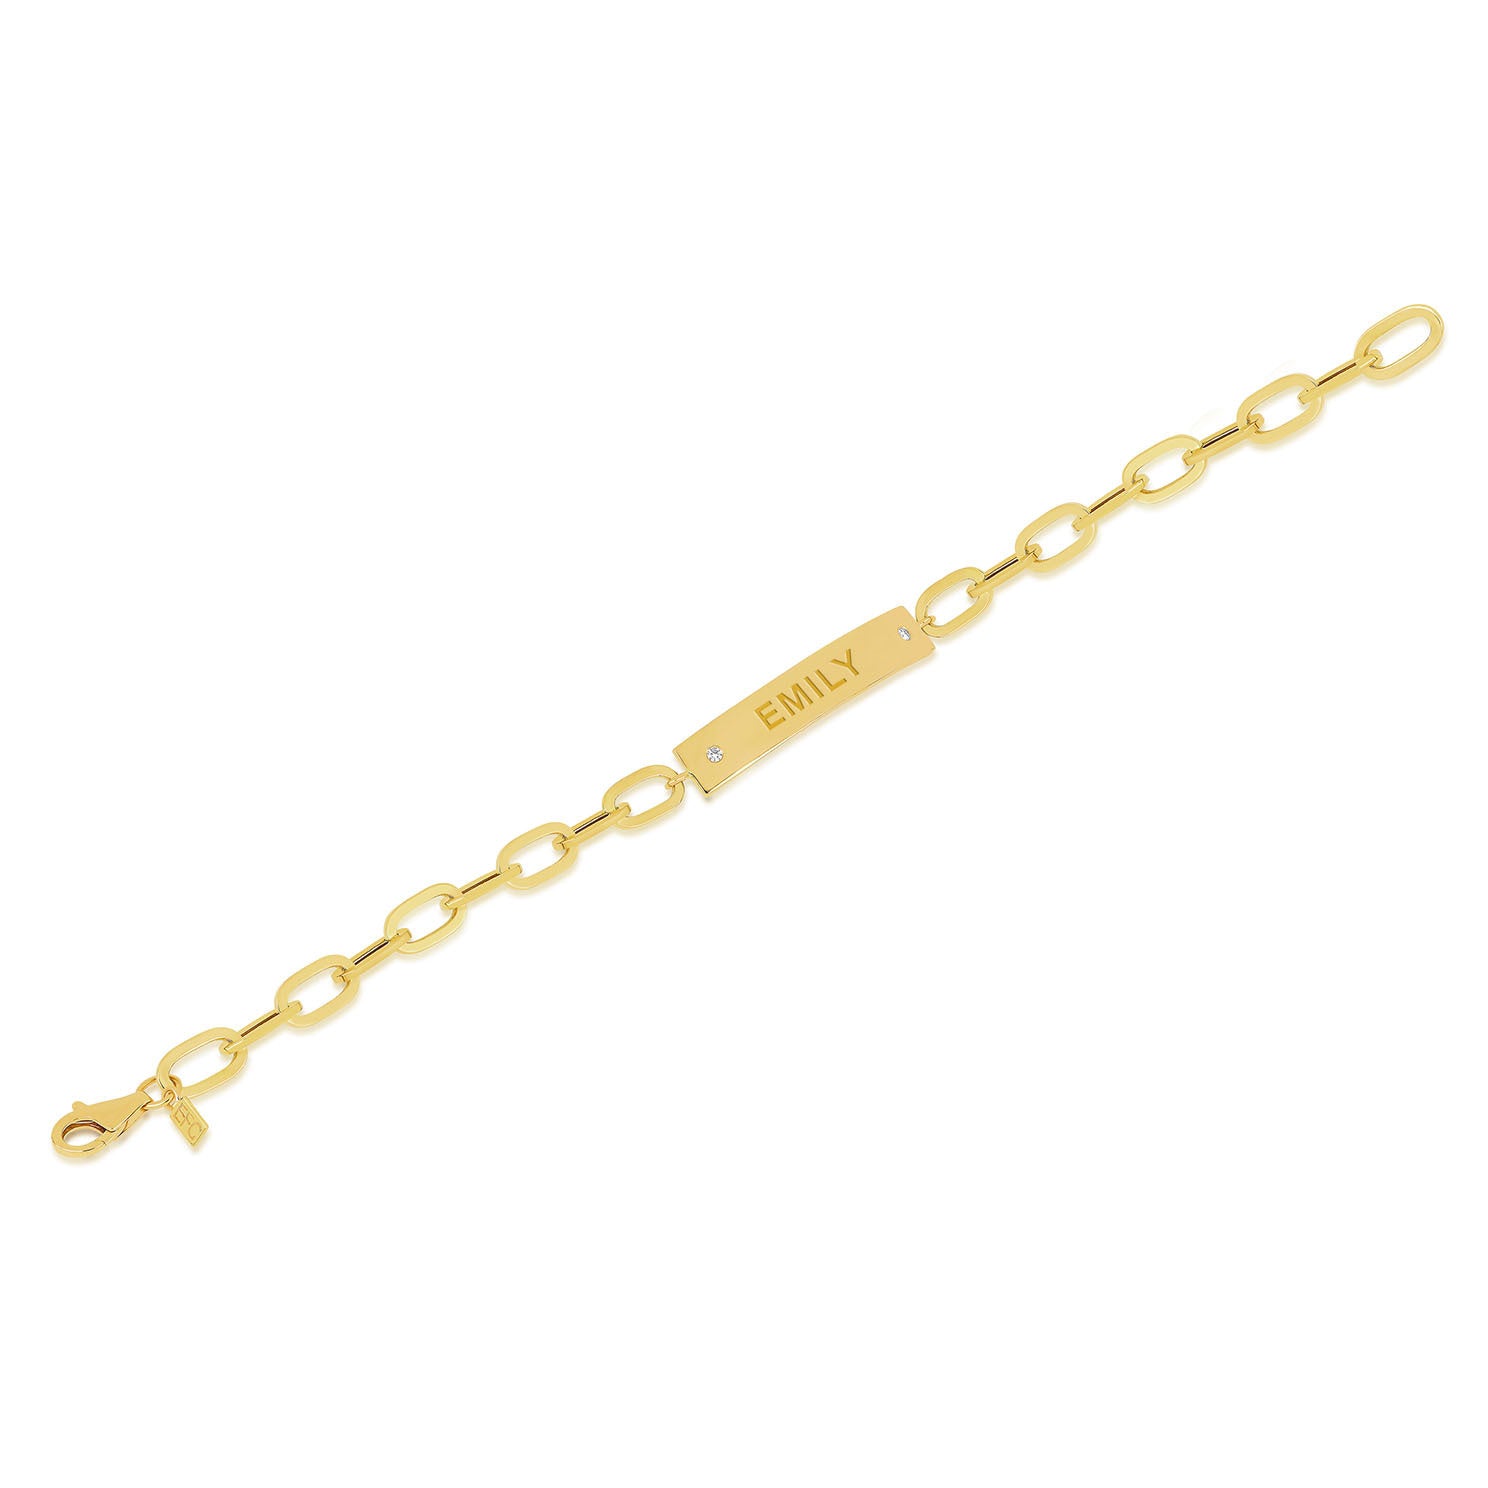 Nameplate Jumbo Link Bracelet in 14k yellow gold engraved with initials EMILY in block font